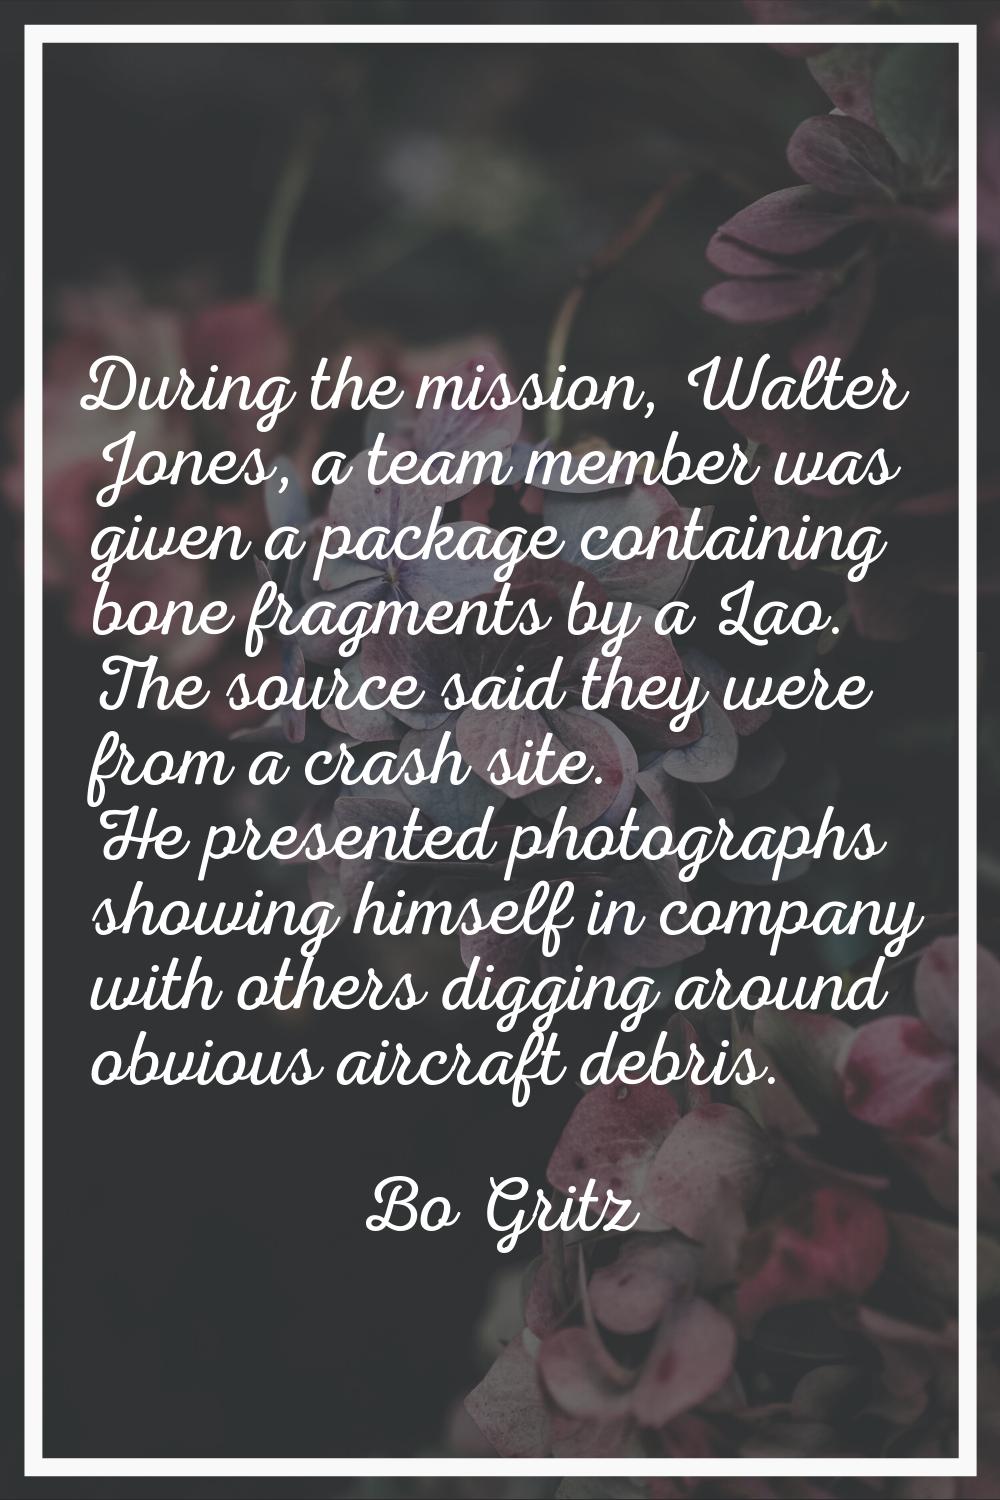 During the mission, Walter Jones, a team member was given a package containing bone fragments by a 